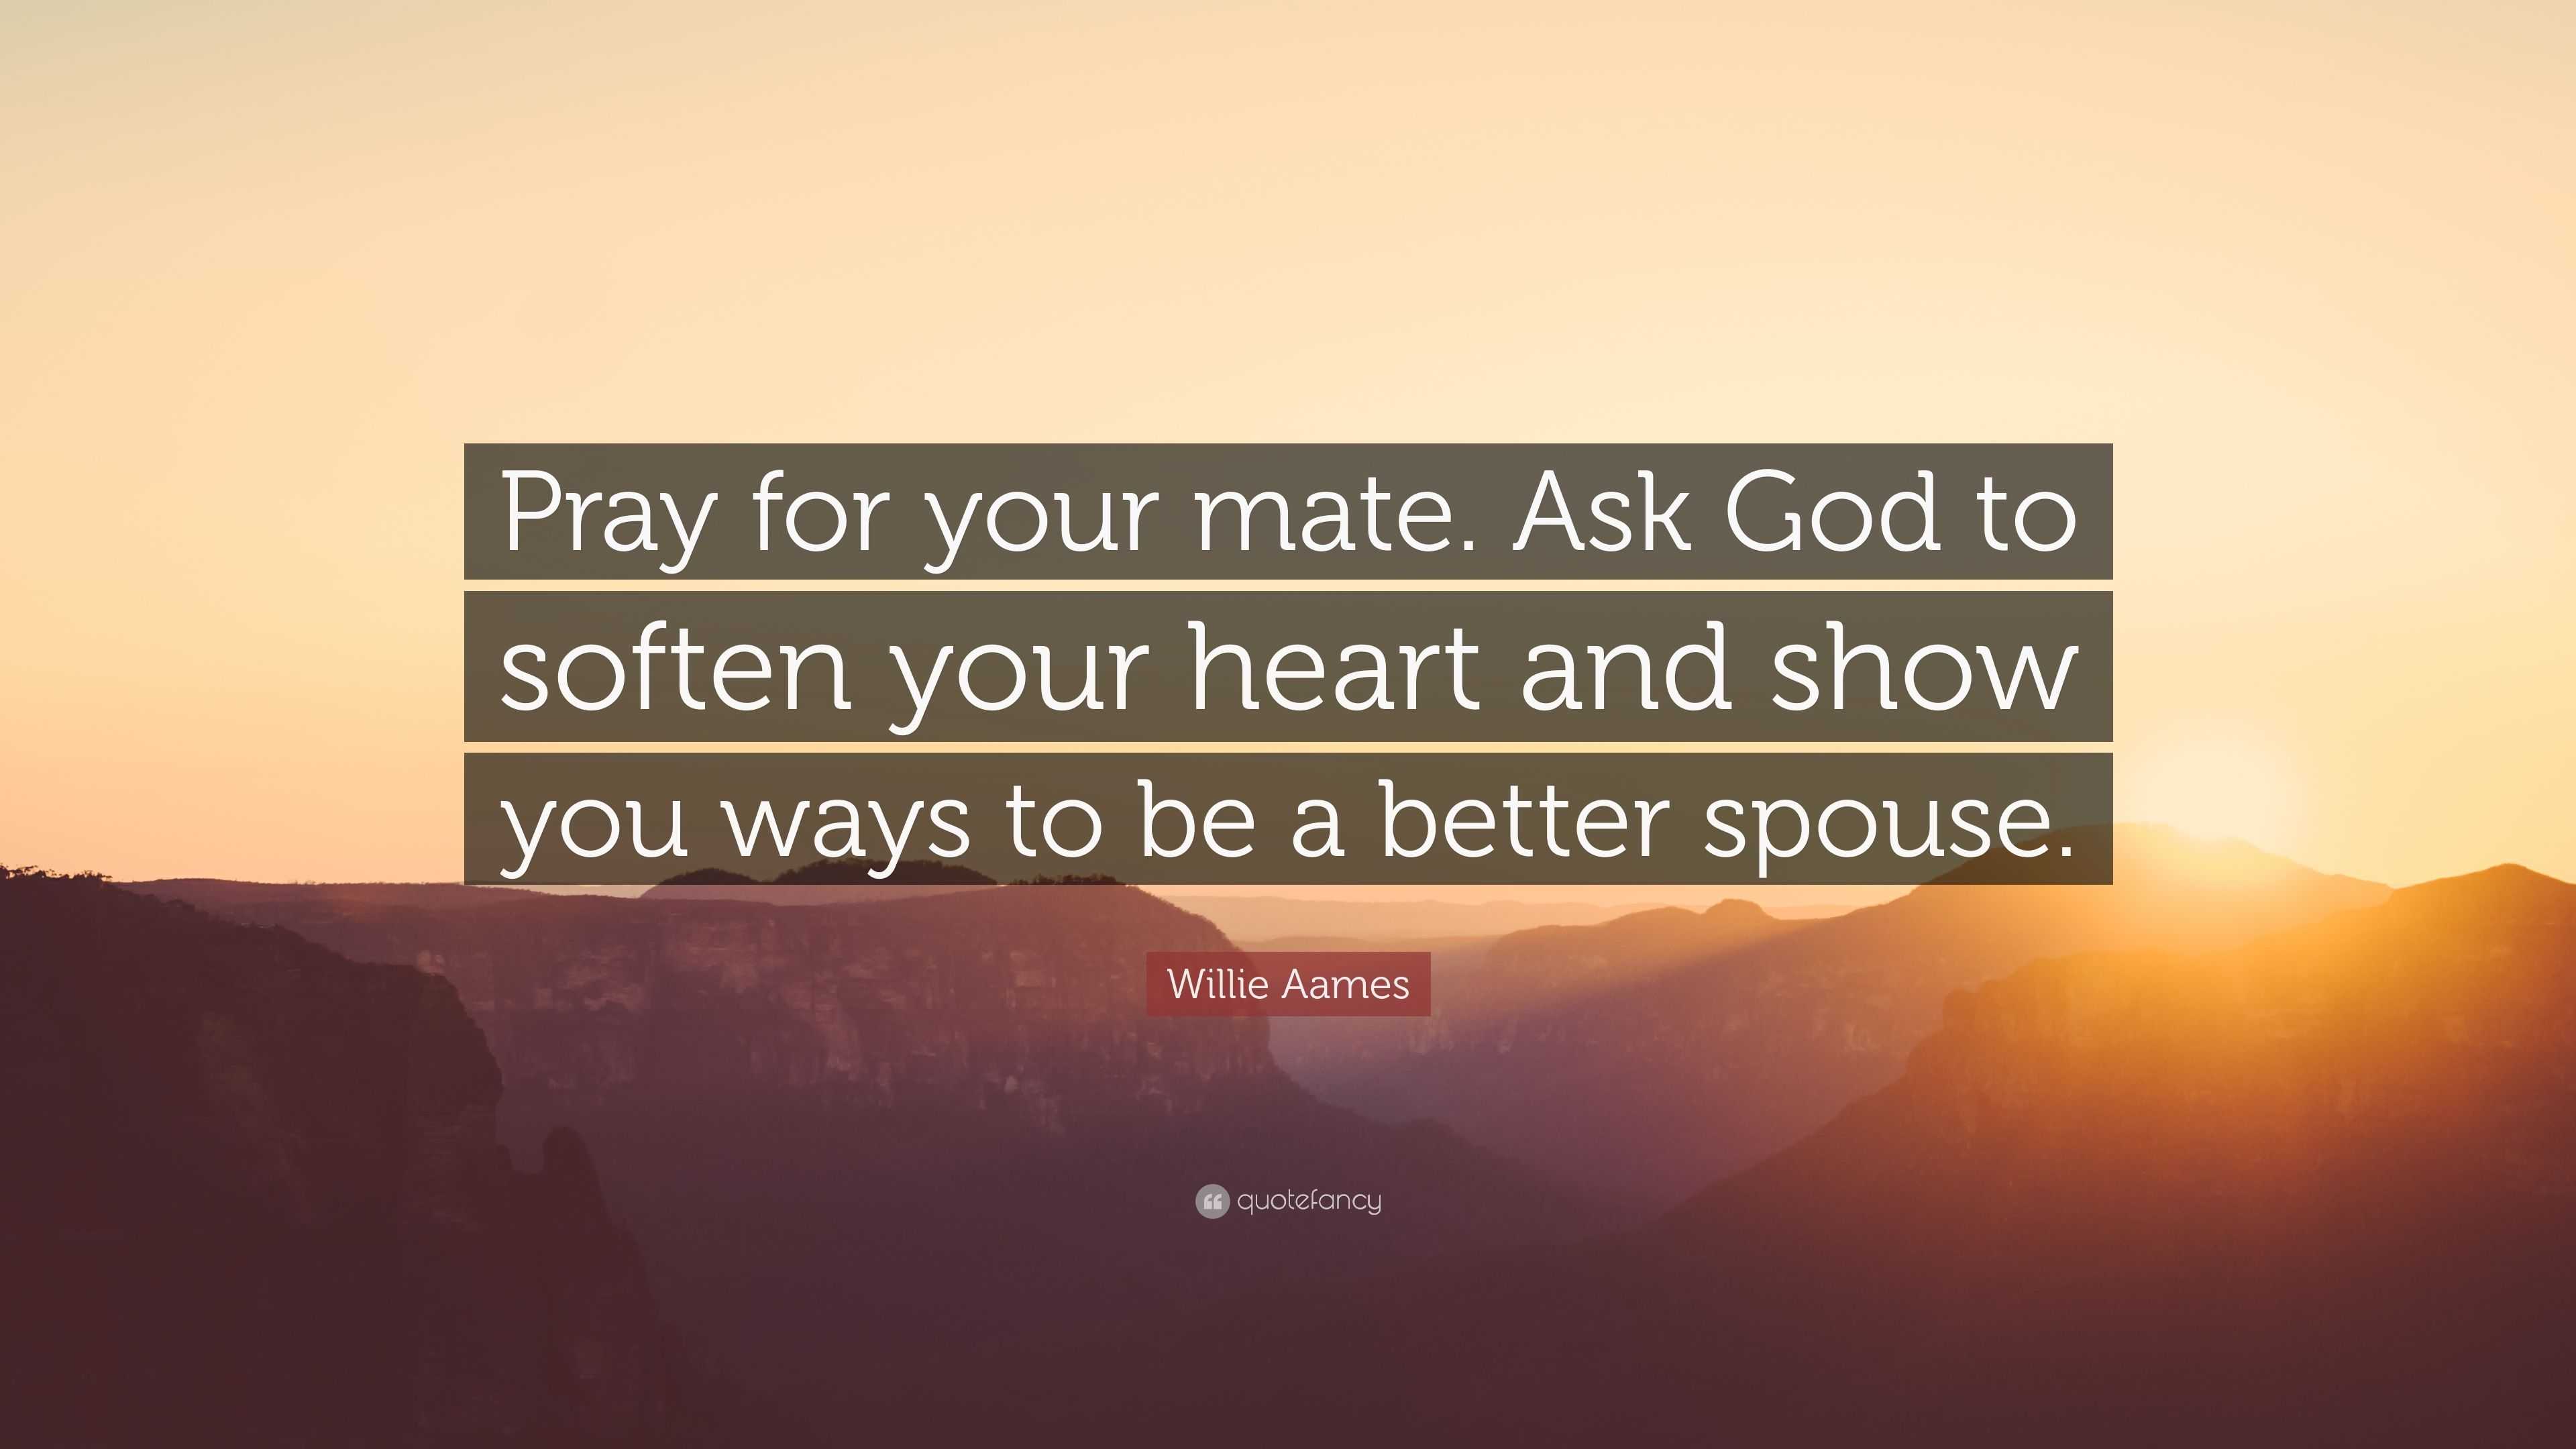 Pray with All Your Heart